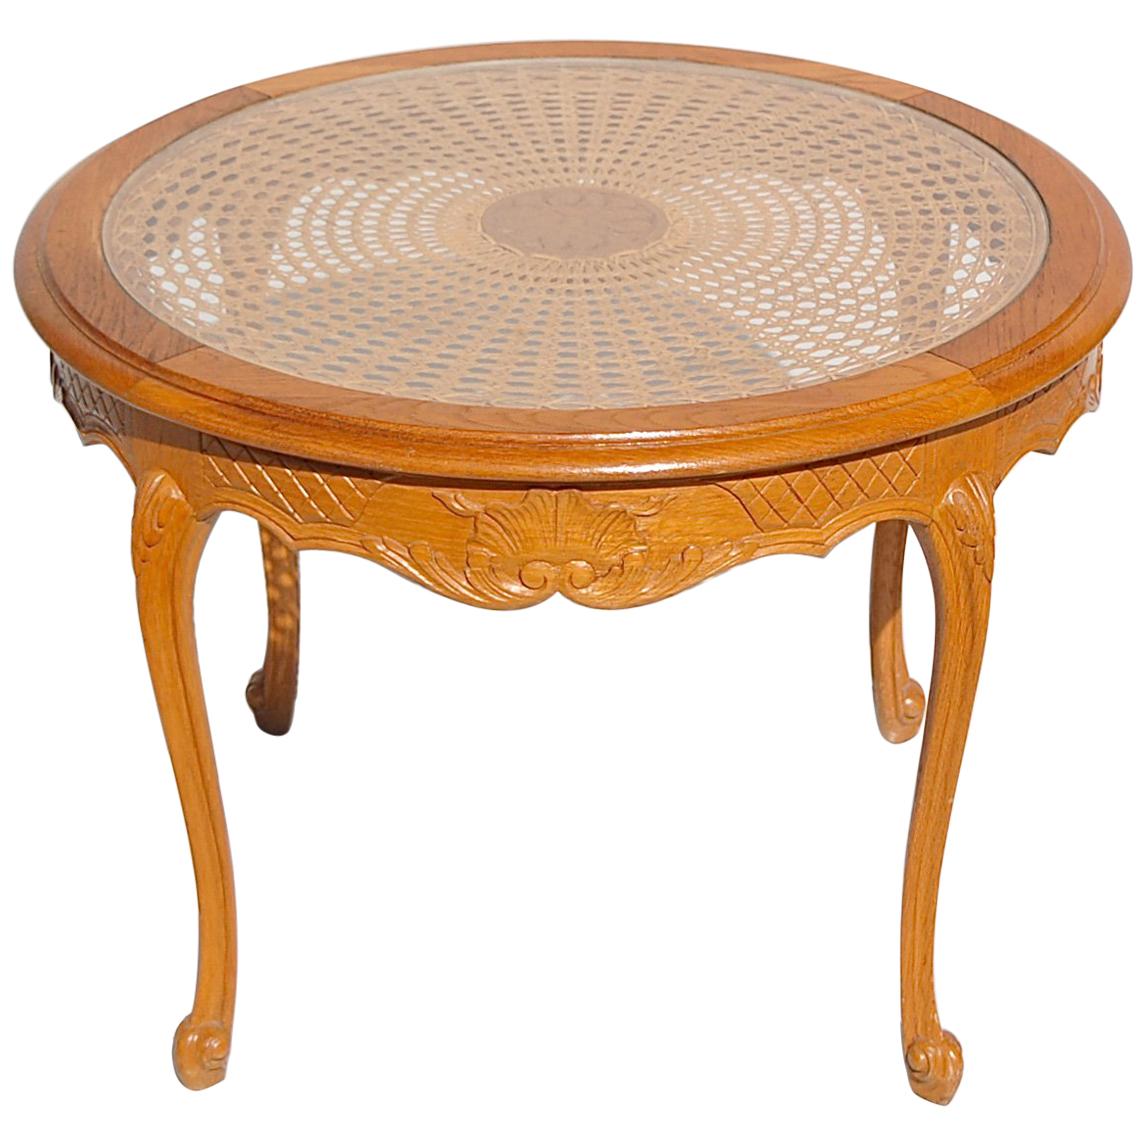 Circular Coffee Table with Cane and Glass Top, 1950s, France For Sale